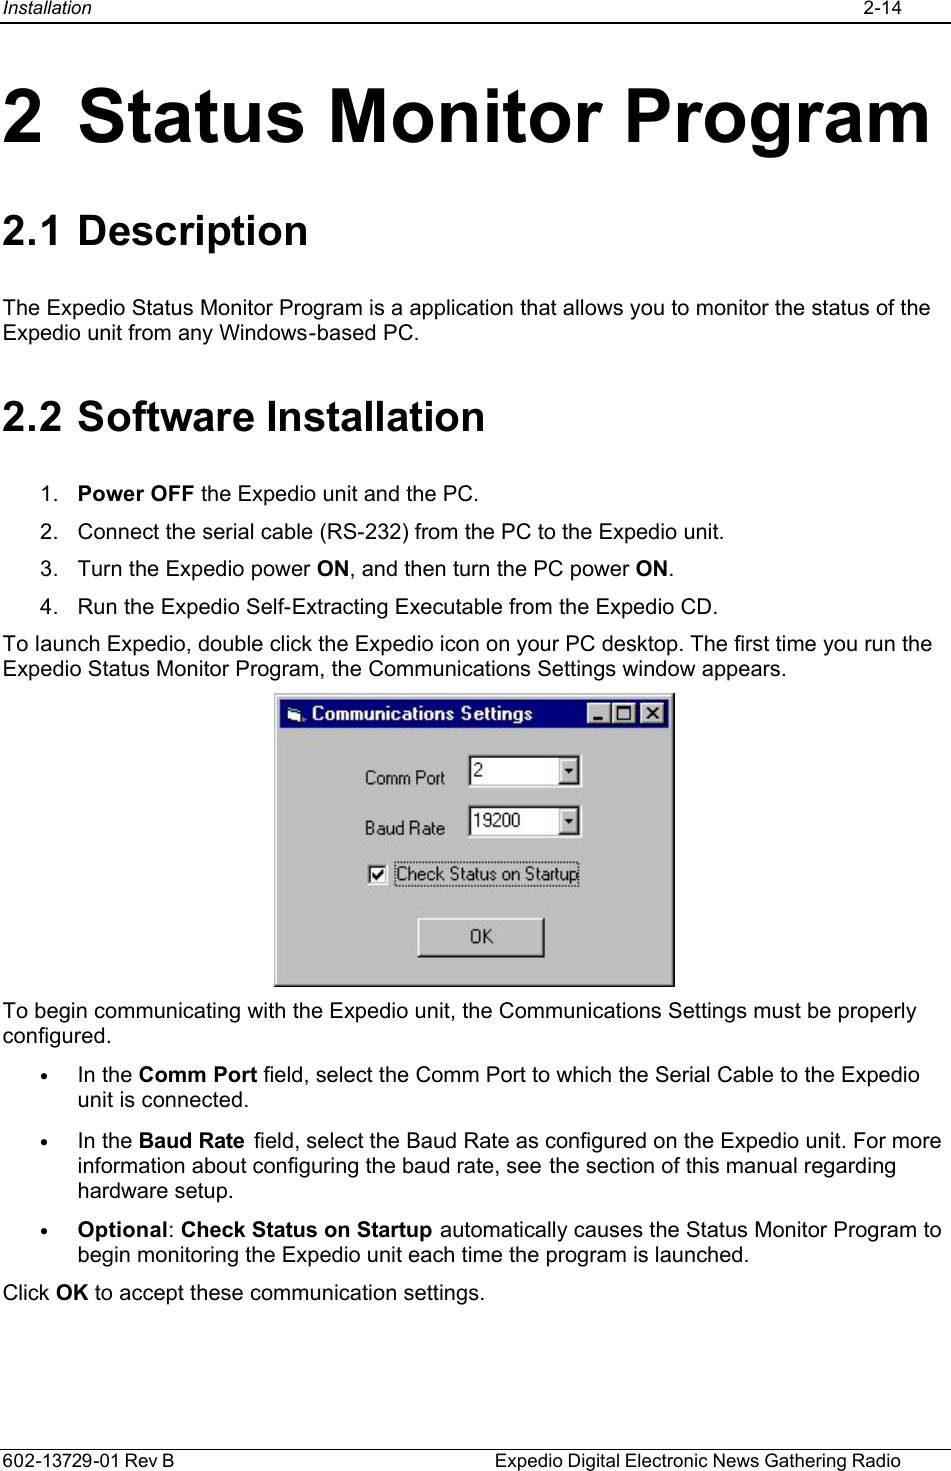 Installation    2-14  602-13729-01 Rev B    Expedio Digital Electronic News Gathering Radio 2 Status Monitor Program 2.1 Description The Expedio Status Monitor Program is a application that allows you to monitor the status of the Expedio unit from any Windows-based PC. 2.2 Software Installation 1. Power OFF the Expedio unit and the PC. 2. Connect the serial cable (RS-232) from the PC to the Expedio unit.  3. Turn the Expedio power ON, and then turn the PC power ON.  4. Run the Expedio Self-Extracting Executable from the Expedio CD. To launch Expedio, double click the Expedio icon on your PC desktop. The first time you run the Expedio Status Monitor Program, the Communications Settings window appears.  To begin communicating with the Expedio unit, the Communications Settings must be properly configured. • In the Comm Port field, select the Comm Port to which the Serial Cable to the Expedio unit is connected. • In the Baud Rate  field, select the Baud Rate as configured on the Expedio unit. For more information about configuring the baud rate, see the section of this manual regarding hardware setup. • Optional: Check Status on Startup automatically causes the Status Monitor Program to begin monitoring the Expedio unit each time the program is launched.  Click OK to accept these communication settings. 